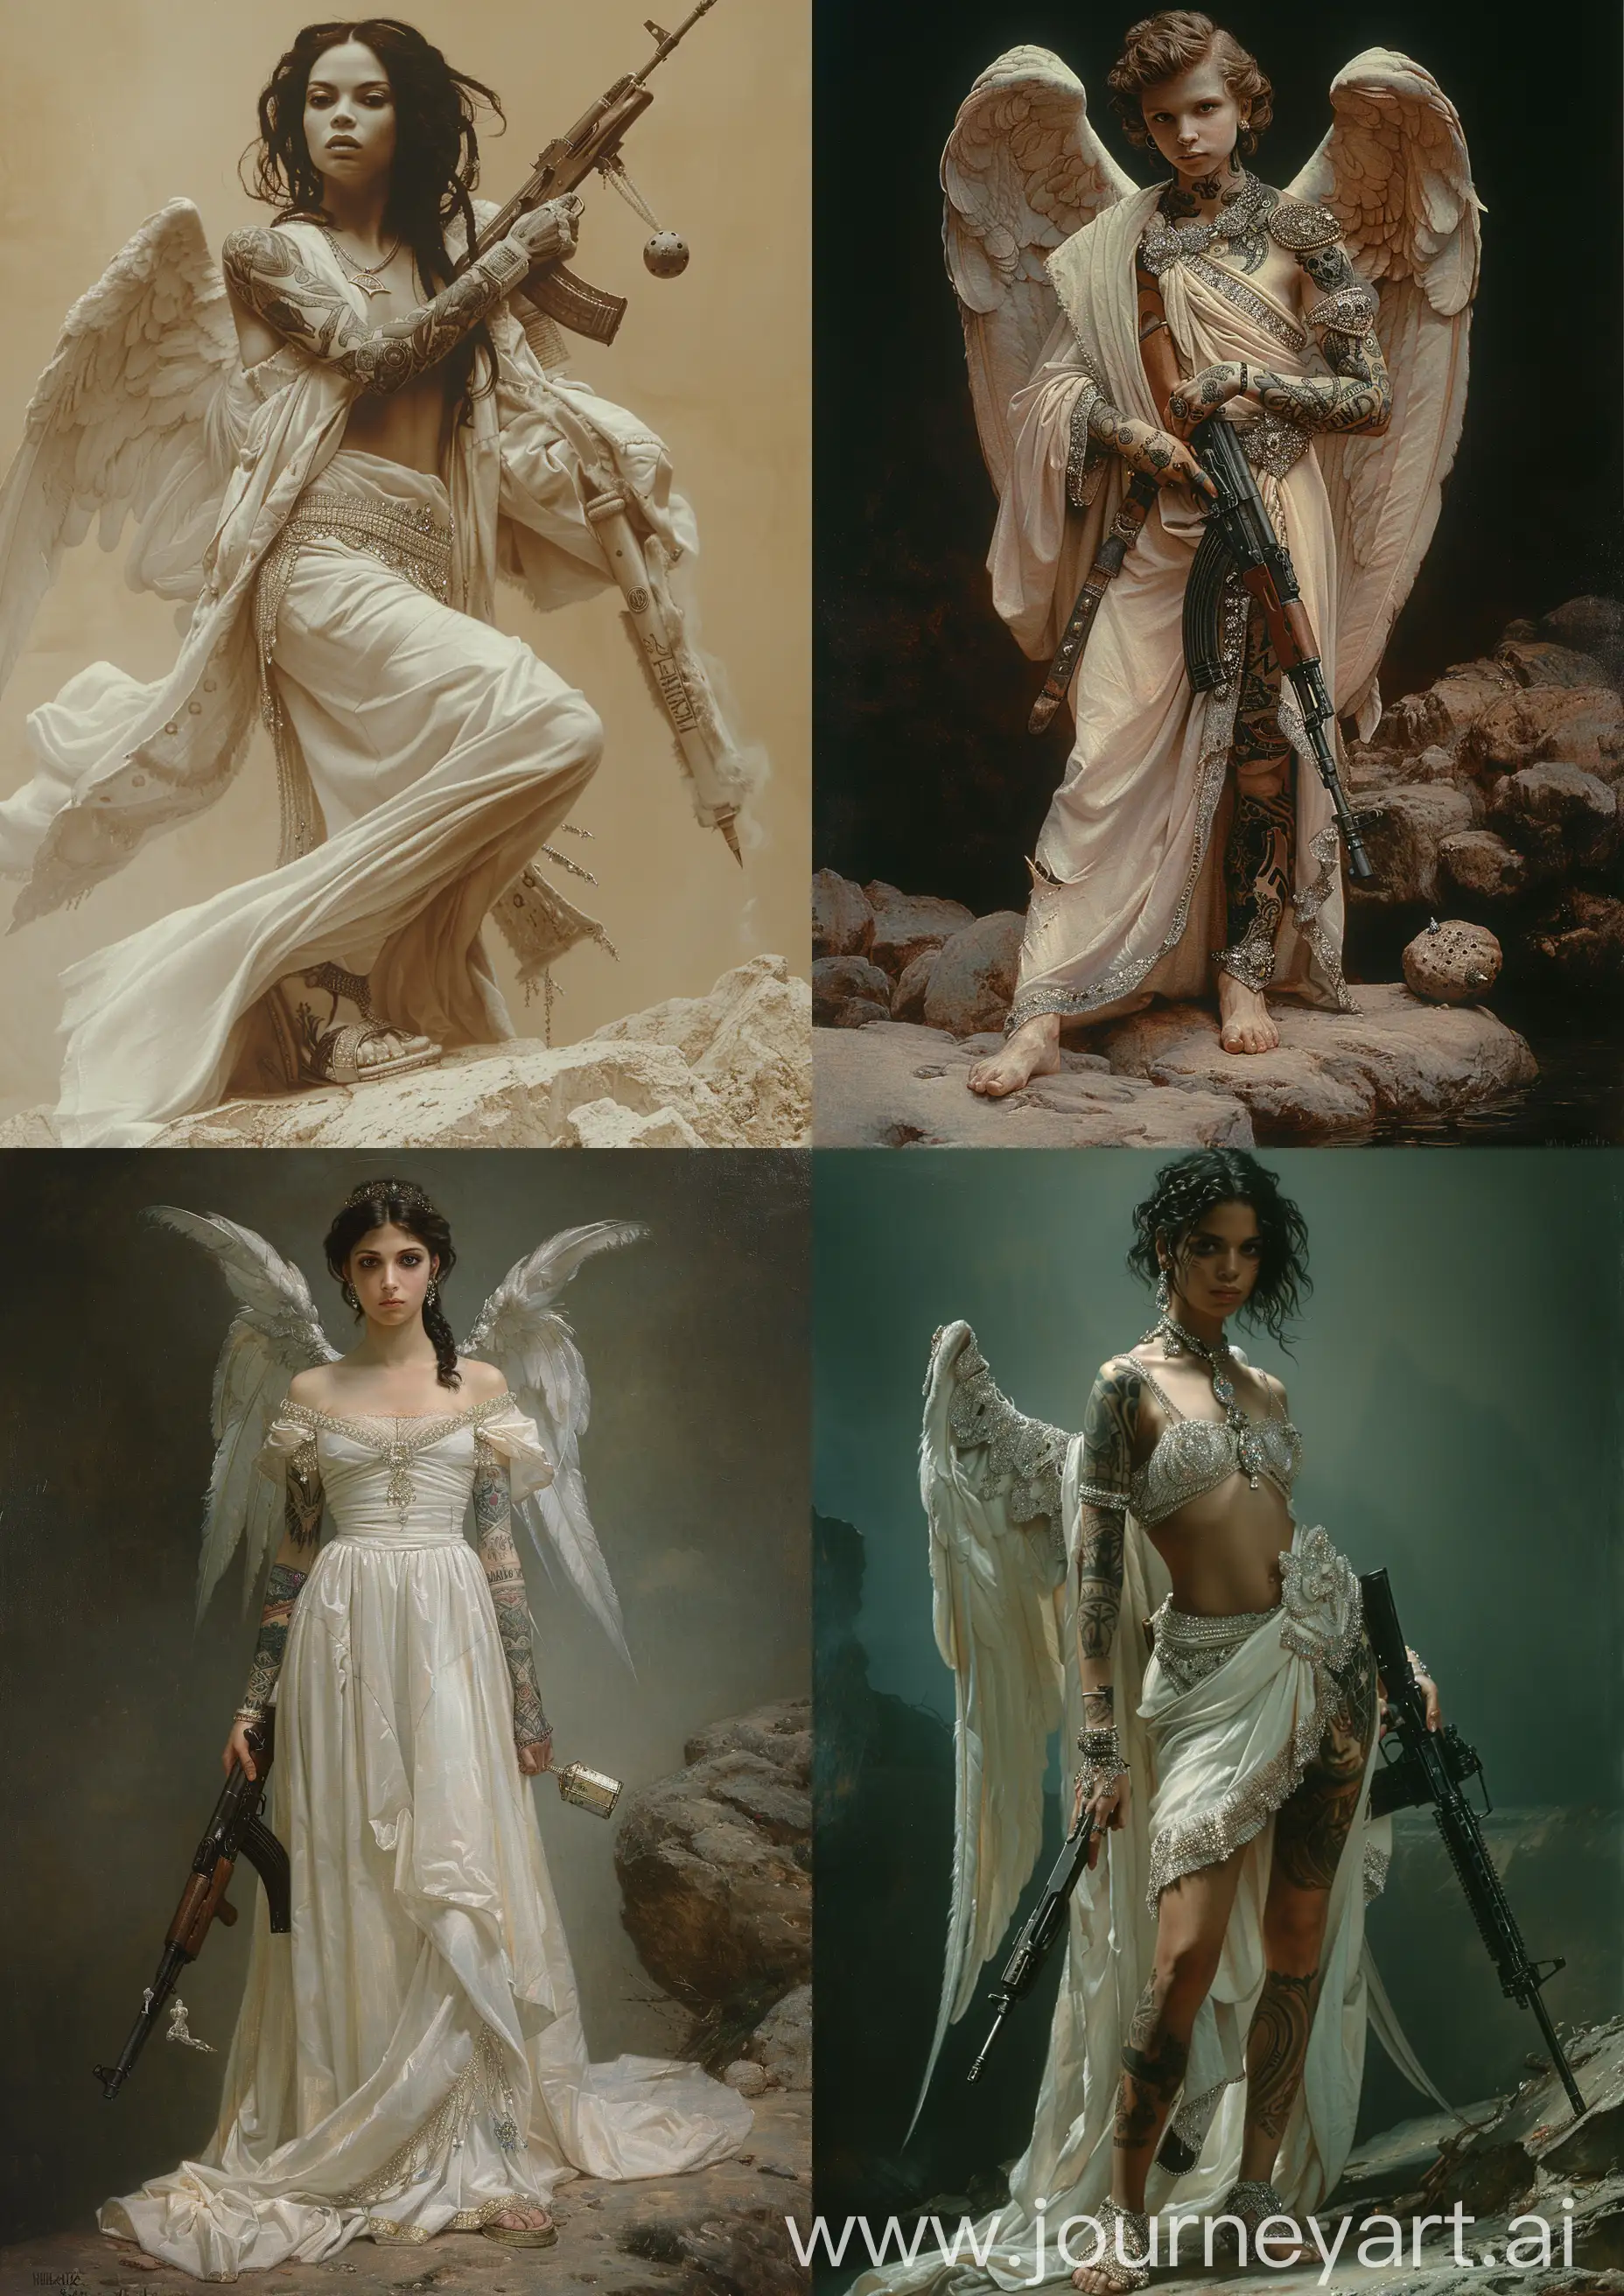 Tattooed-Angel-Warrior-in-Opulent-White-with-Kalashnikov-and-Grenade-on-a-Rock